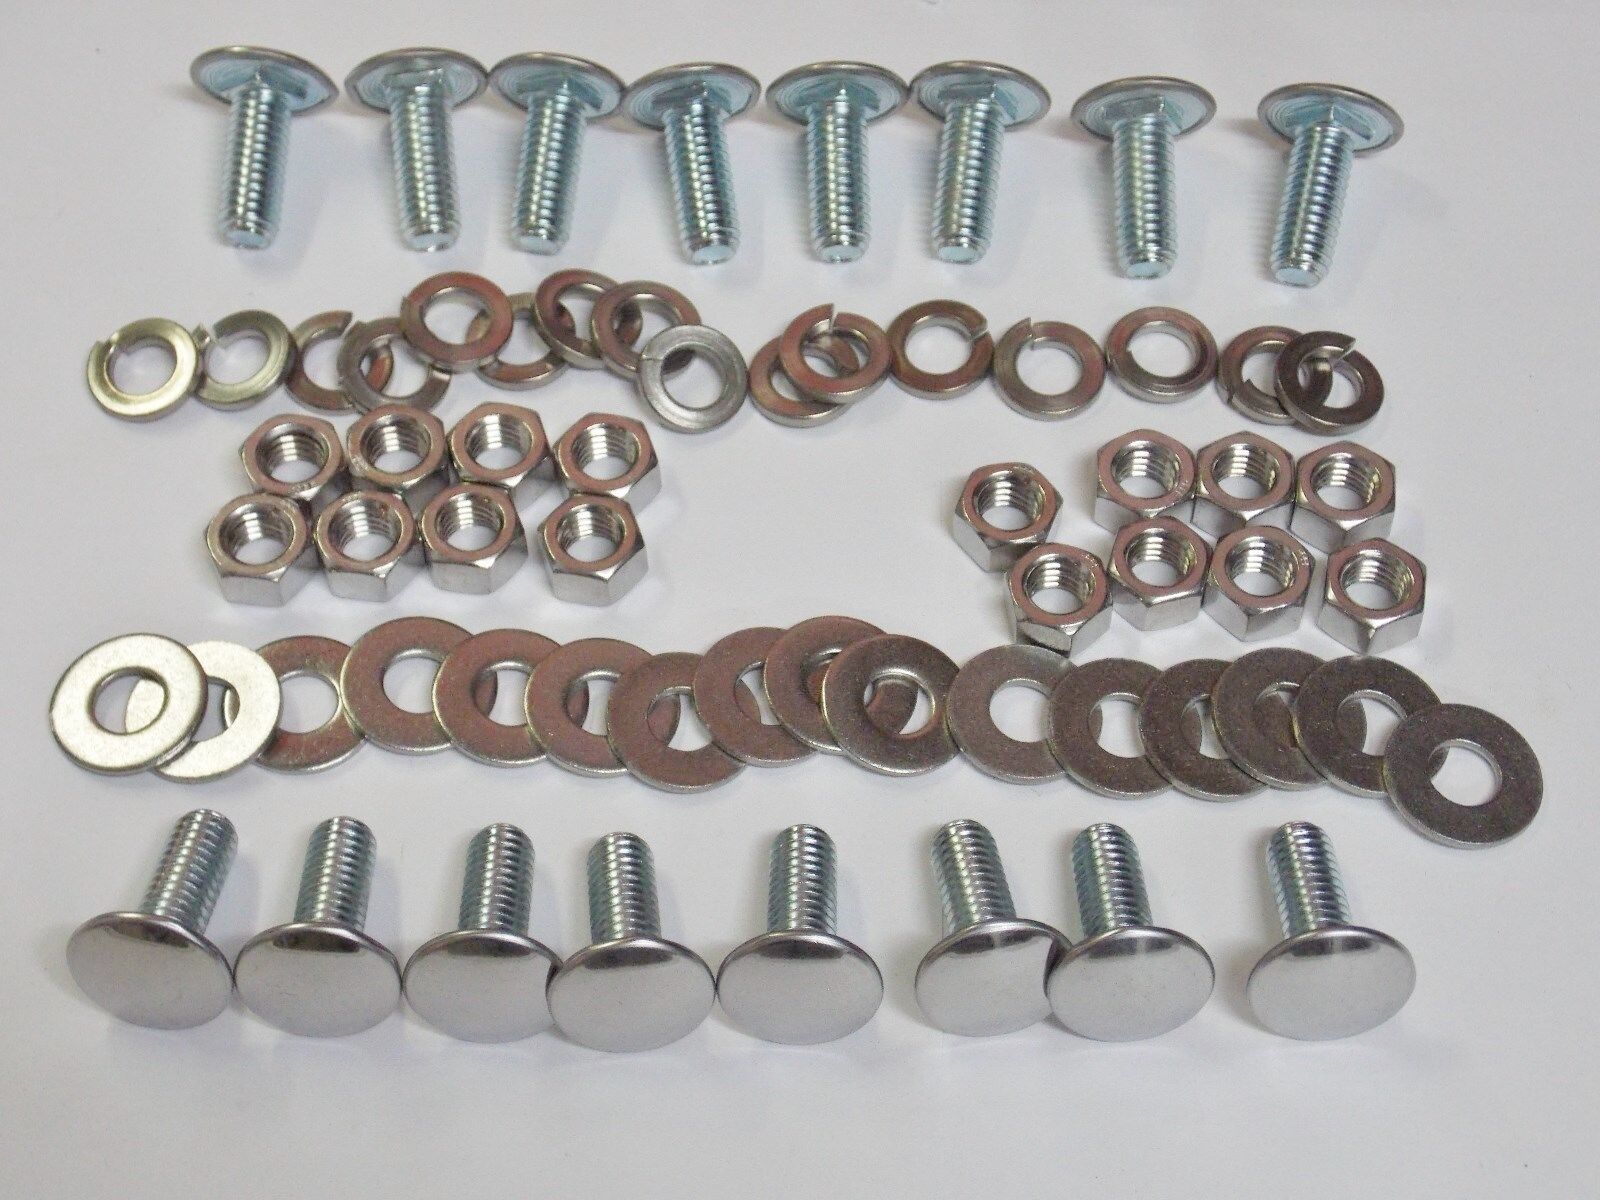 16 pc Plymouth A/B/C/E Bumper Bolts Nuts Locks & Flat Washers Stainless Capped